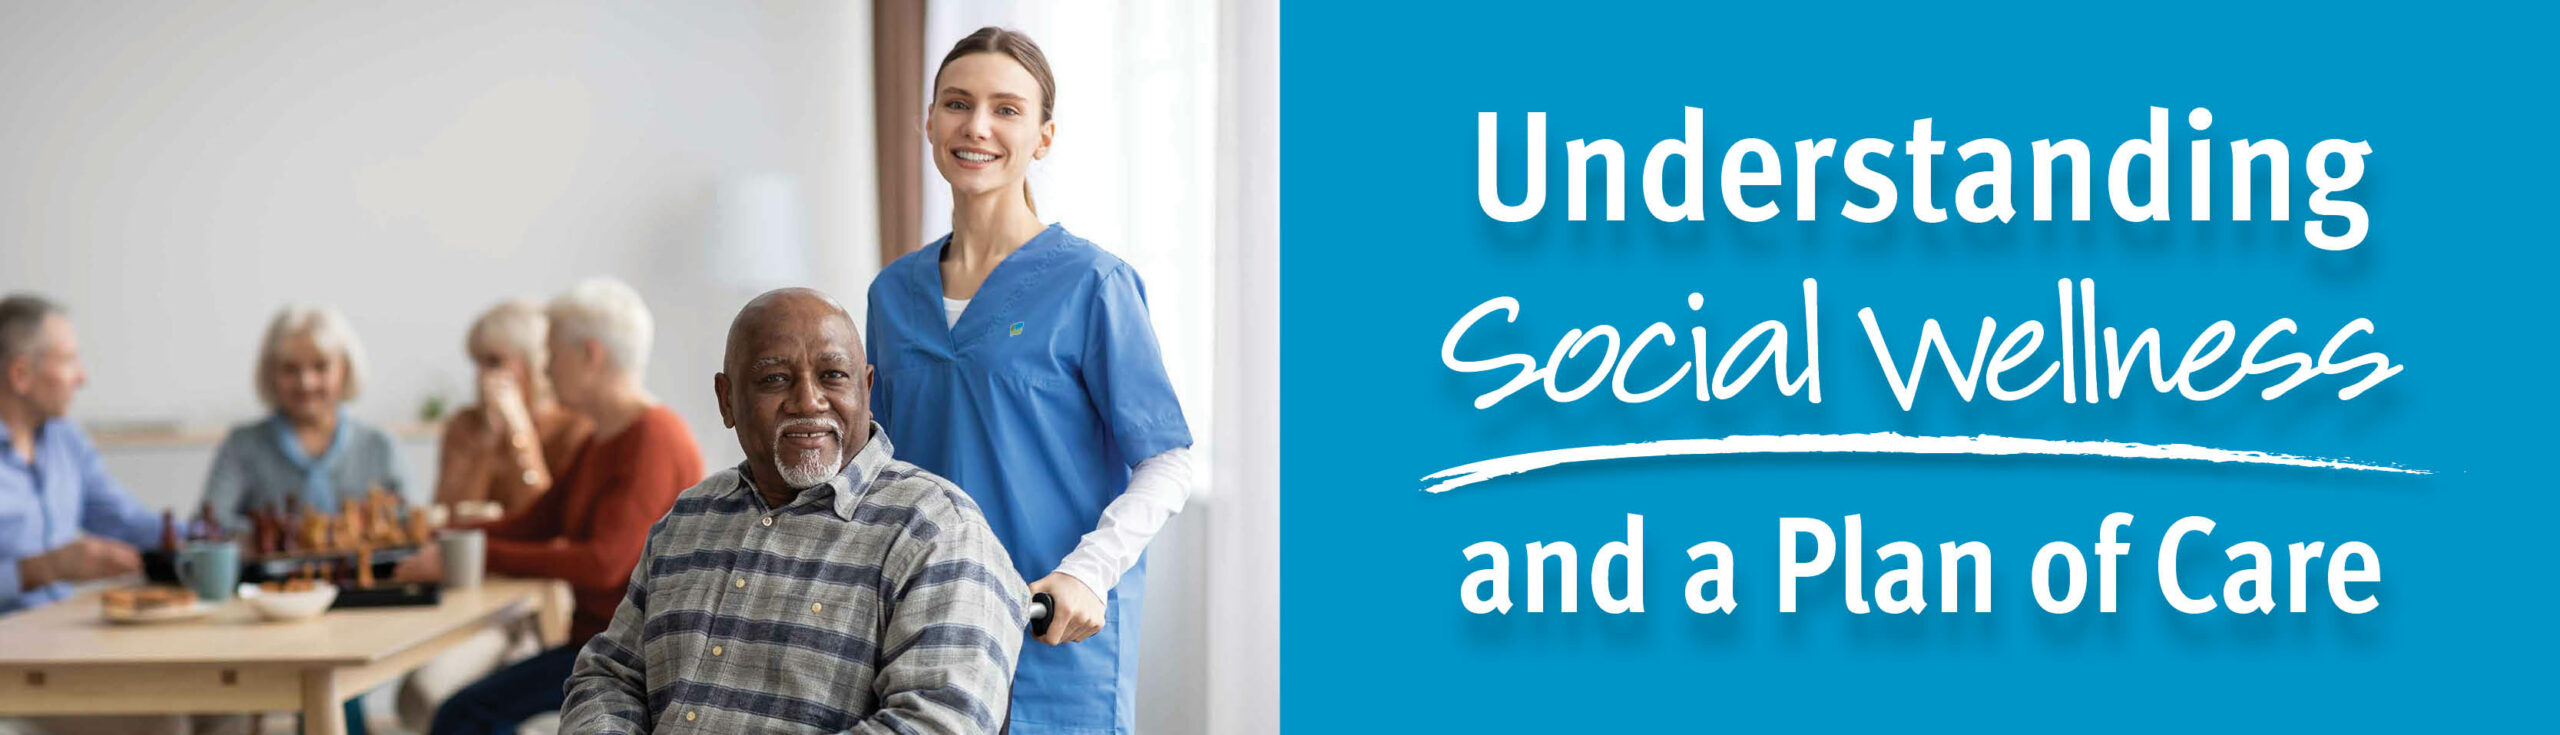 Understanding Social Wellness and a Plan of Care